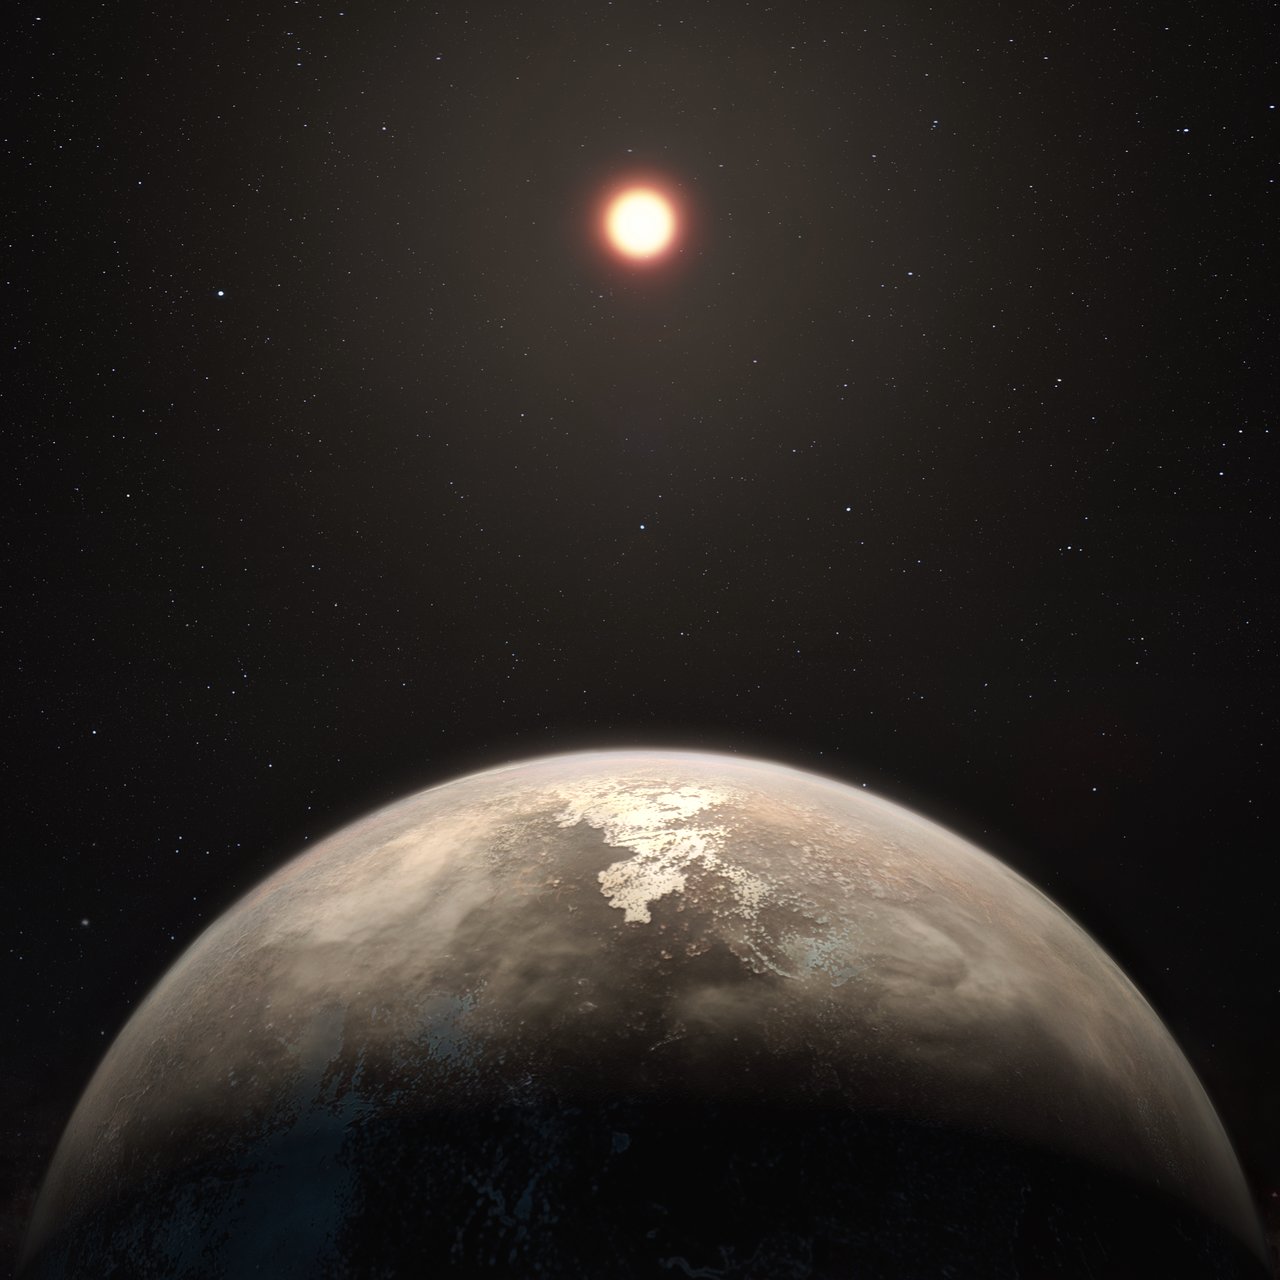 This artist’s impression shows the temperate planet Ross 128 b, with its red dwarf parent star in the background. This planet, which lies only 11 light-years from Earth, was found by a team using ESO’s unique planet-hunting HARPS instrument.